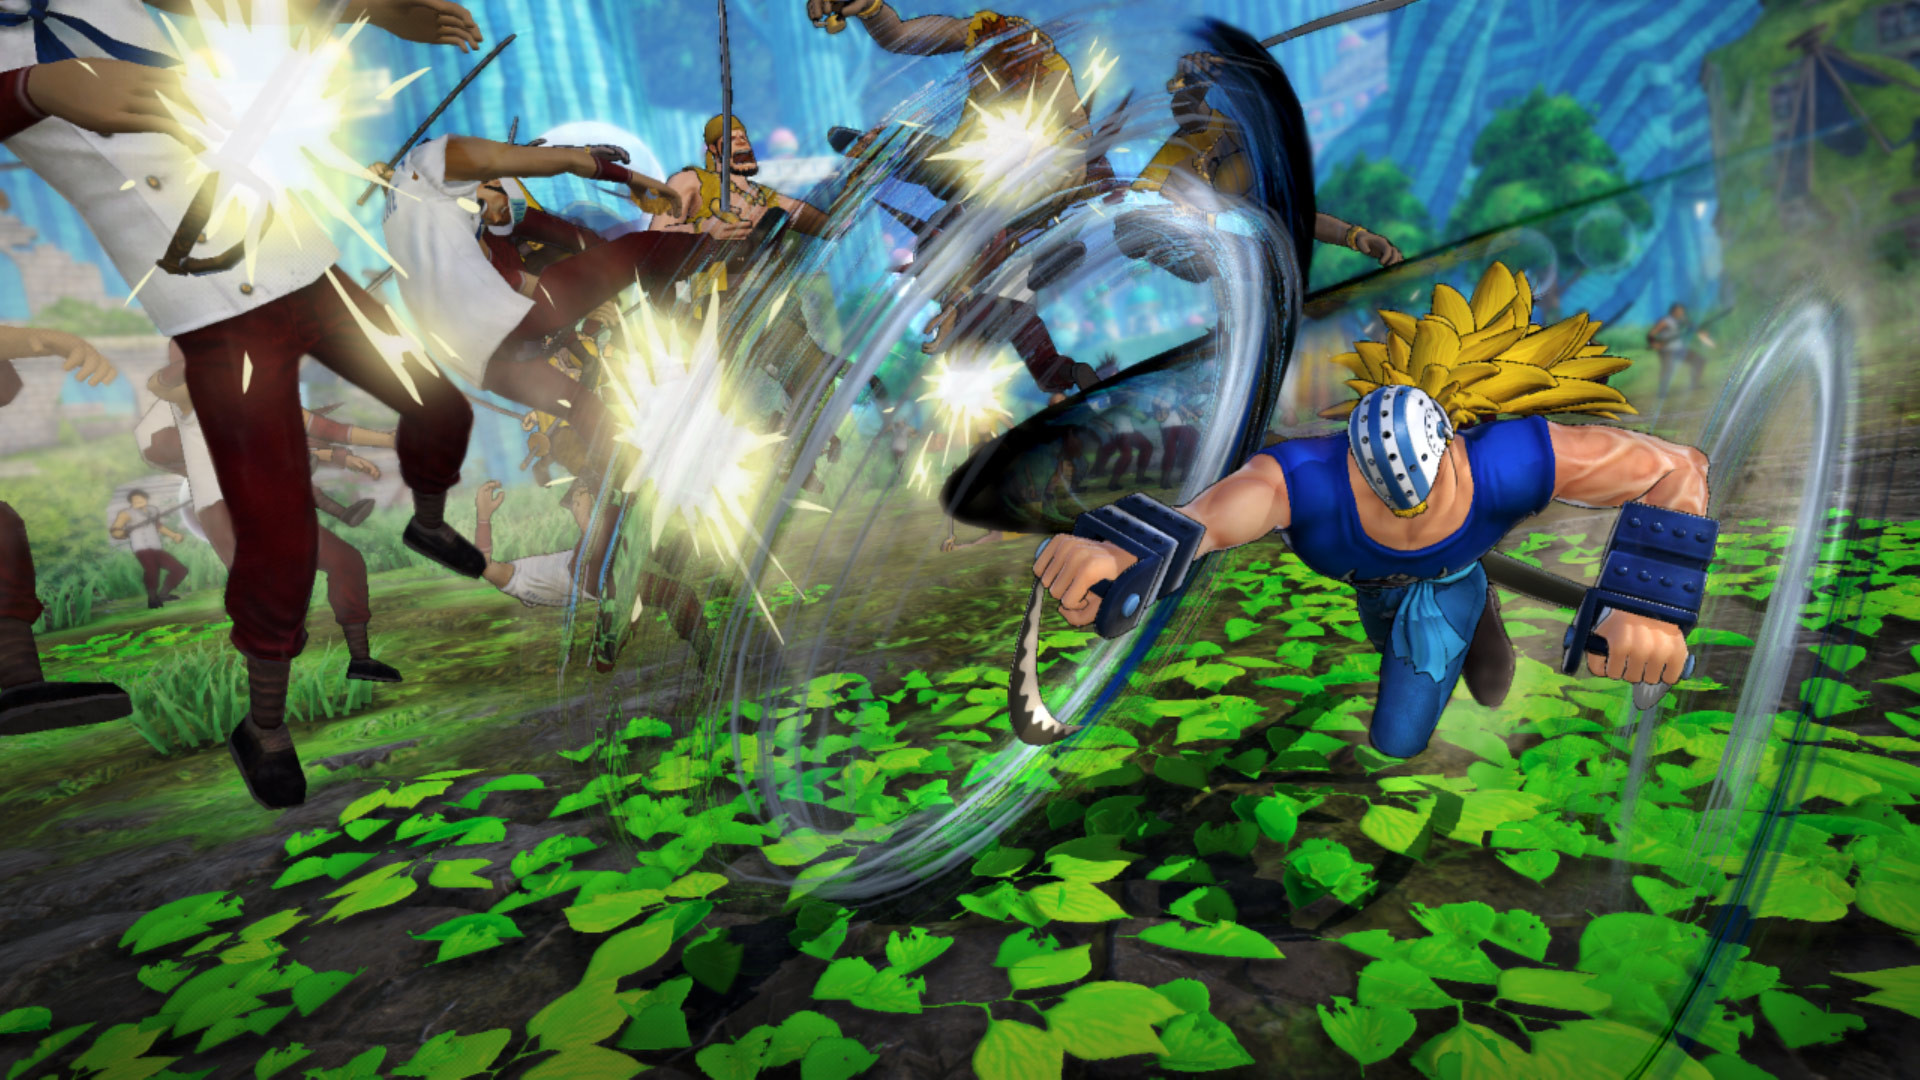 ONE PIECE: PIRATE WARRIORS 4 Additional Episodes Pack on Steam